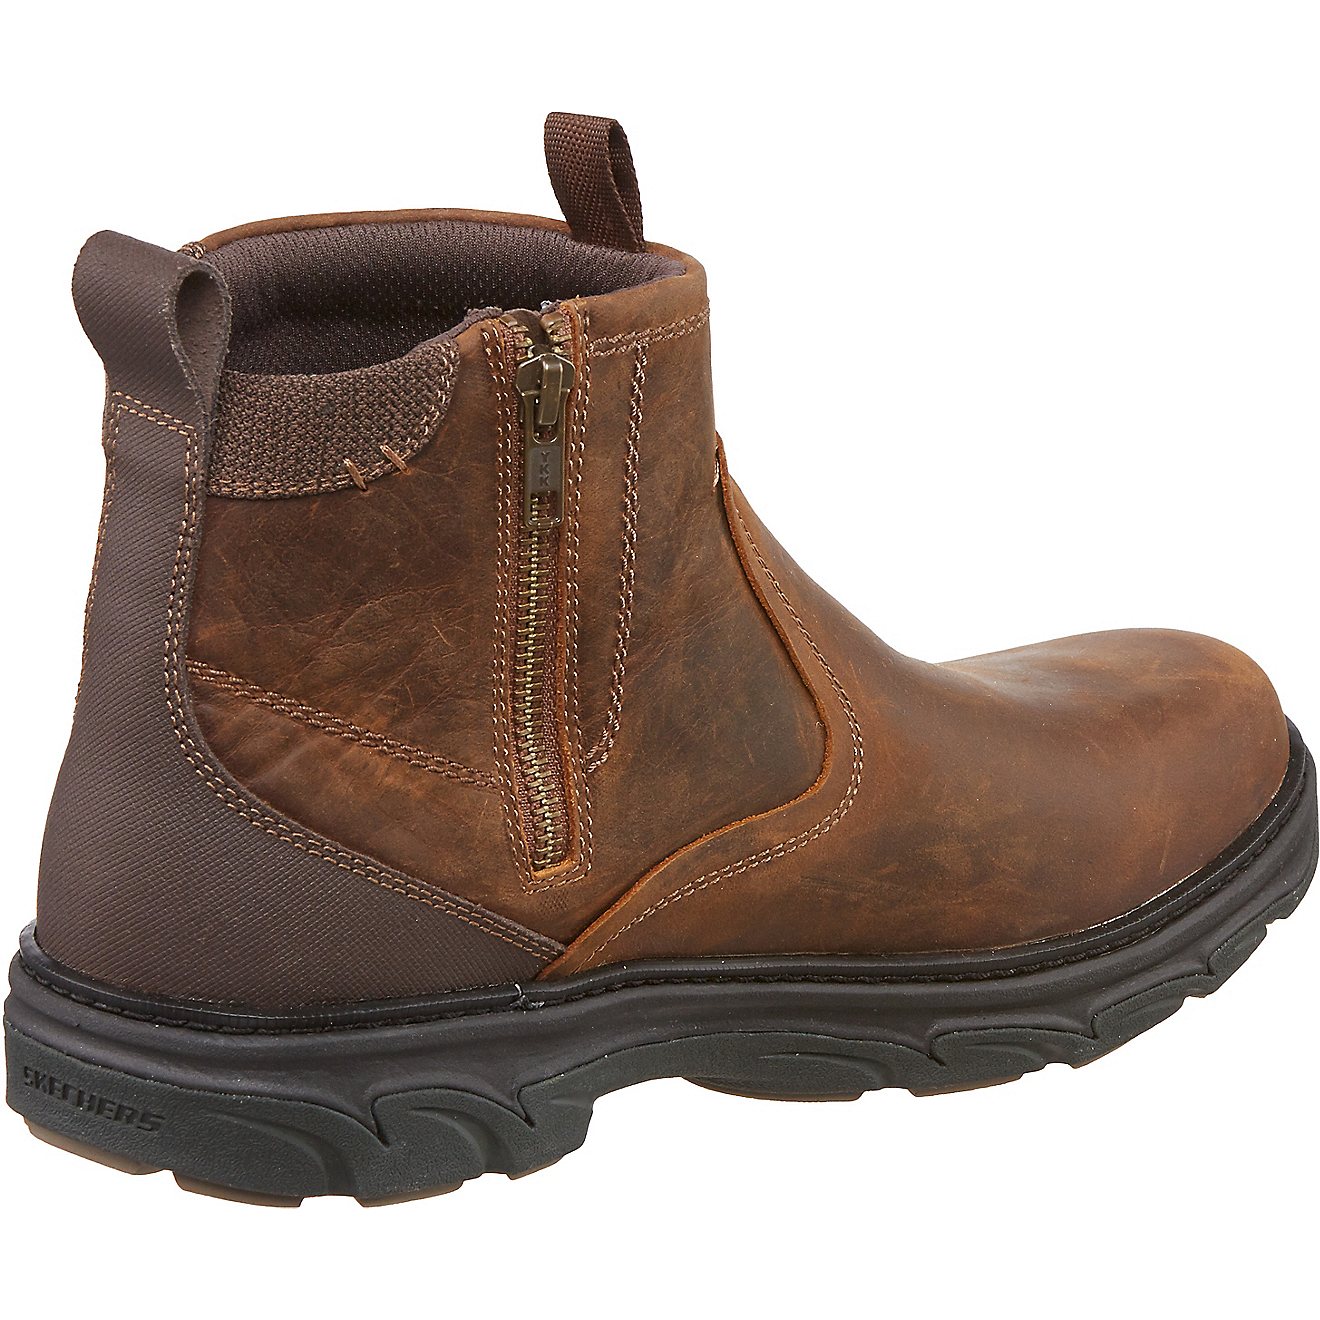 SKECHERS Men's Relaxed Fit Resment Boots                                                                                         - view number 3